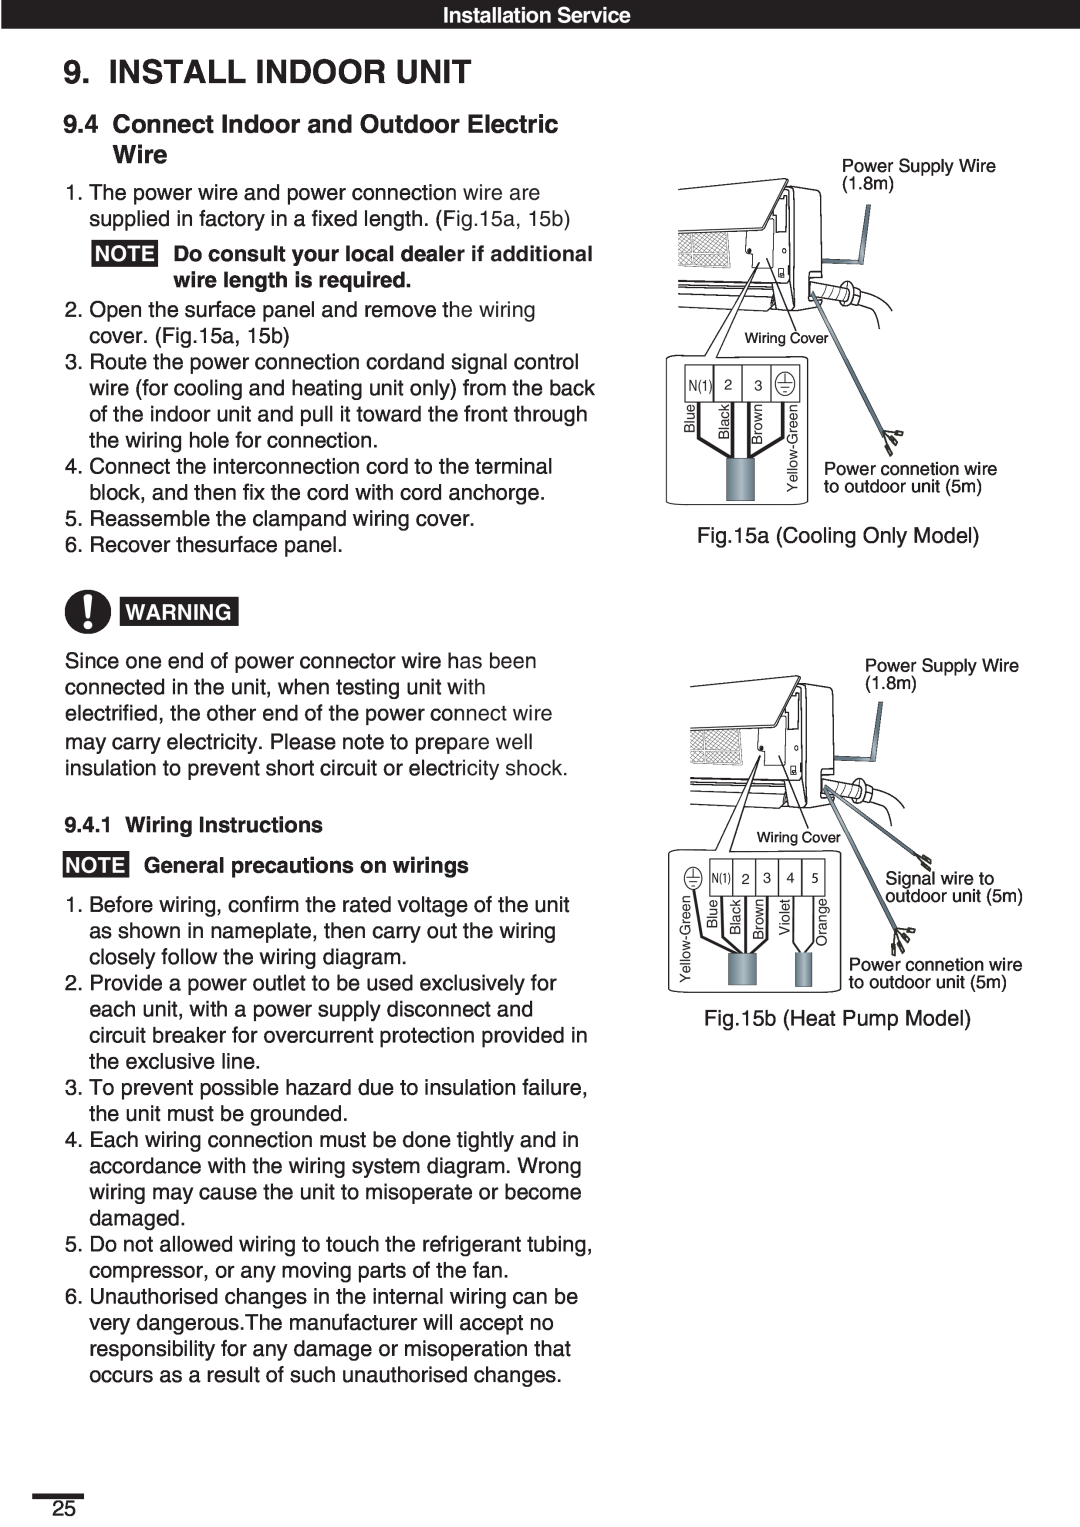 Haier KC18AGH Install Indoor Unit, 9.4Connect Indoor and Outdoor Electric Wire, Installation Service, Wiring Instructions 